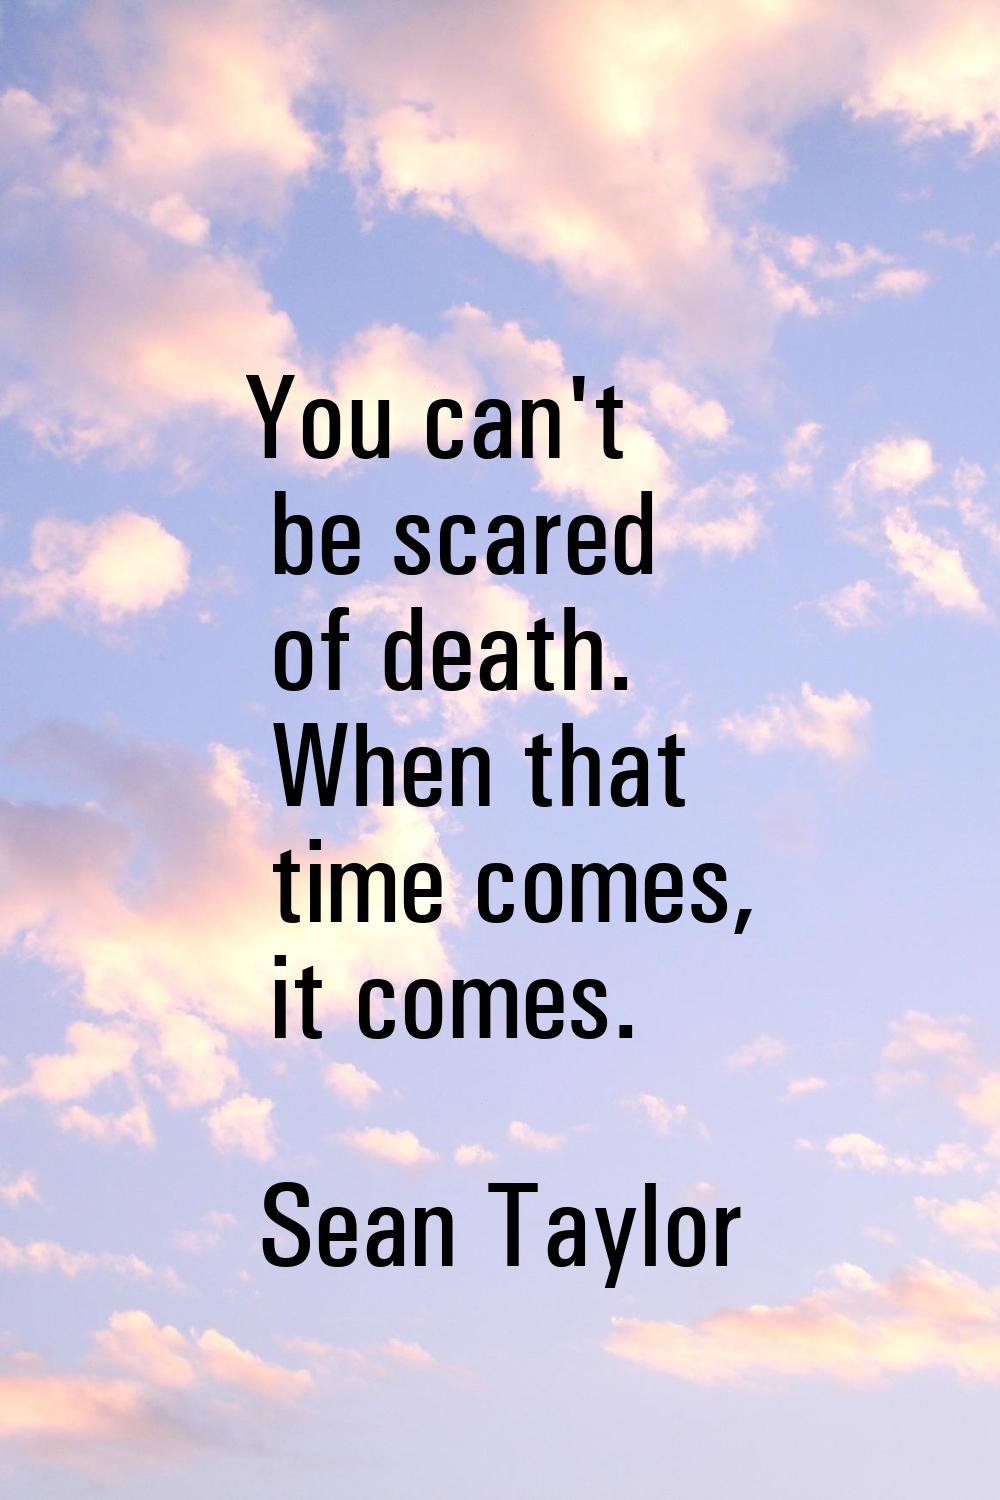 You can't be scared of death. When that time comes, it comes.